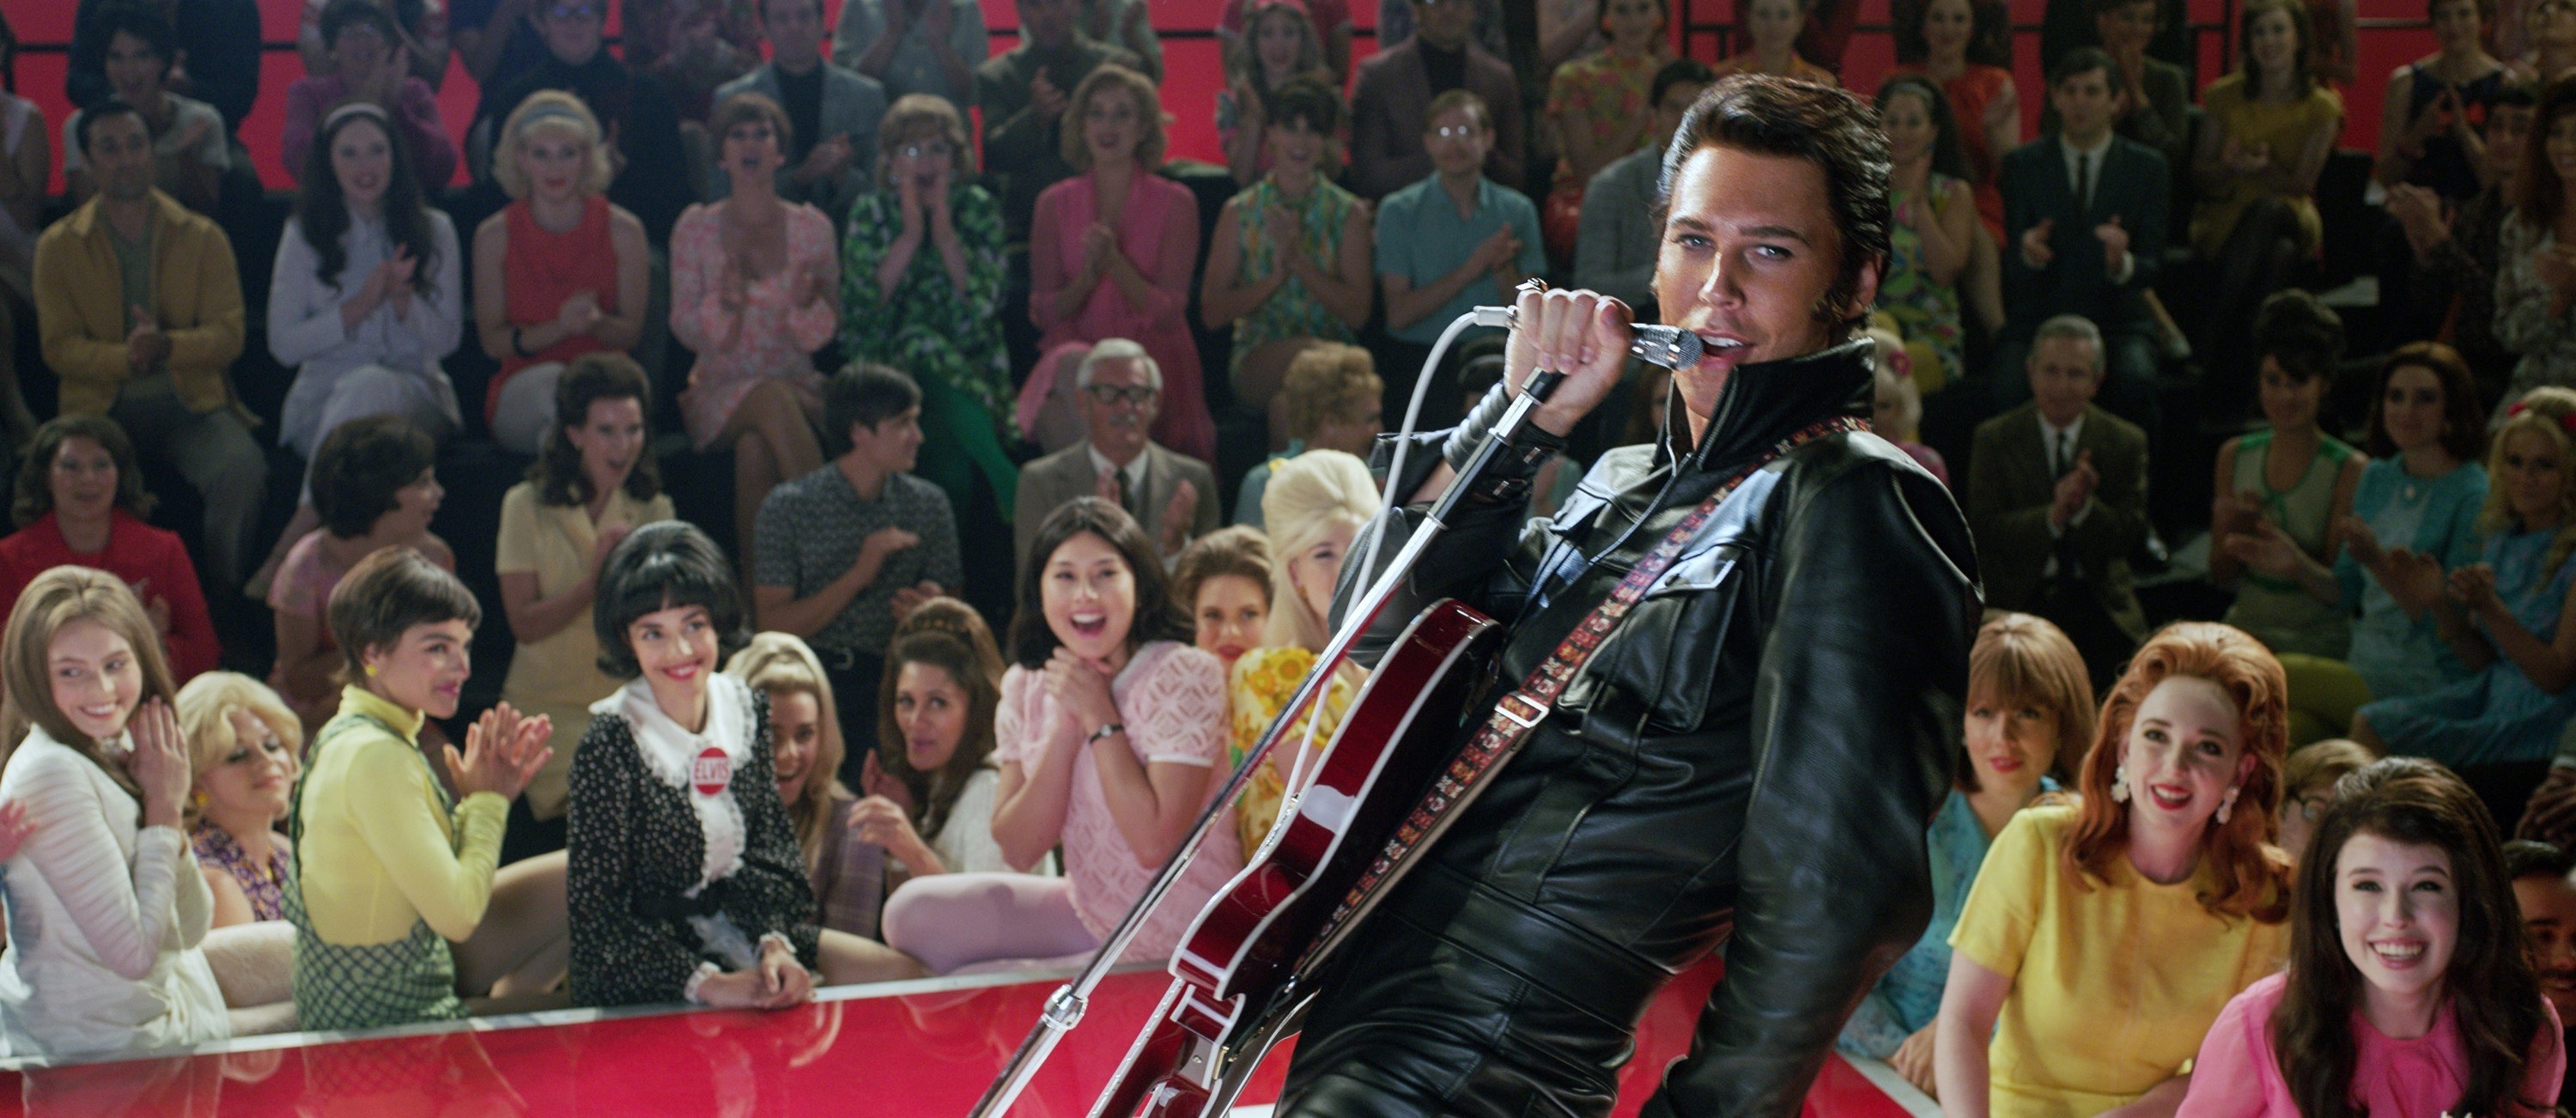 Austin as Elvis leaning back as he performs onstage in a leather suit